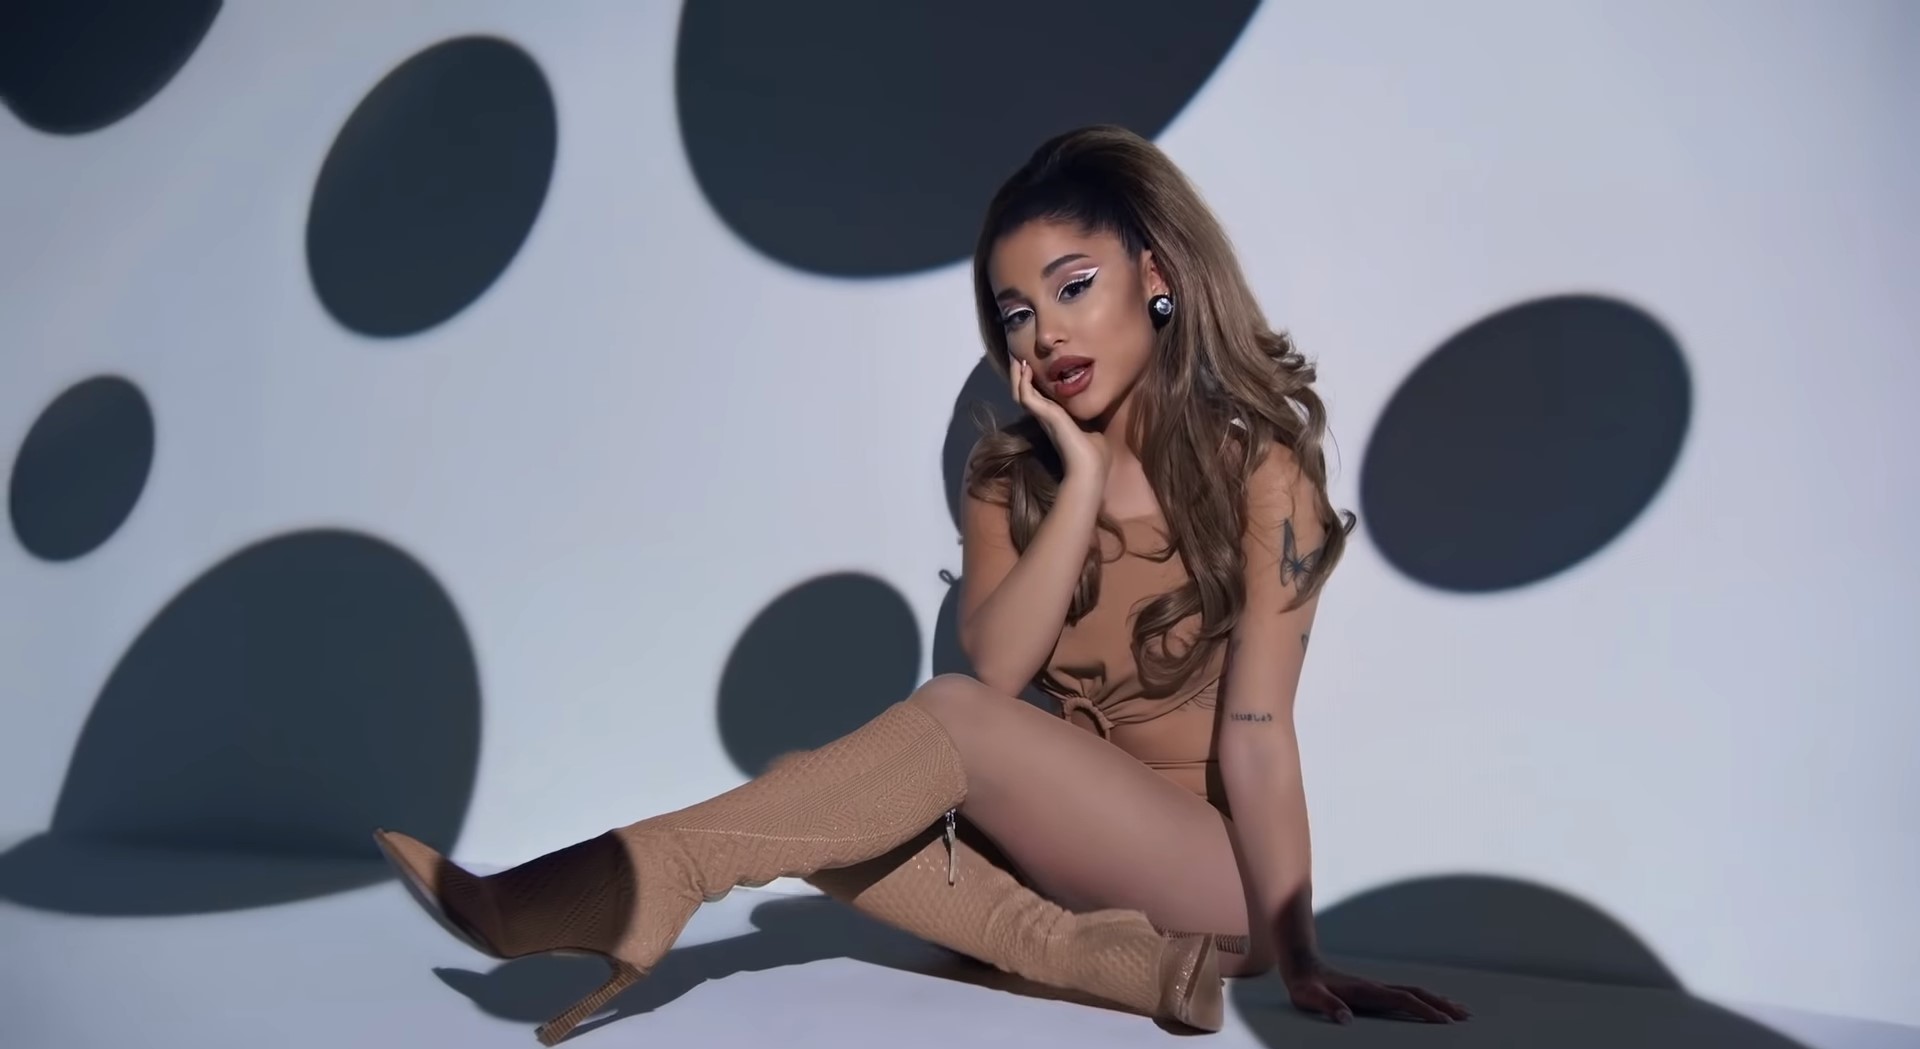 chelsea swanger recommends ariana grande sexiest video pic